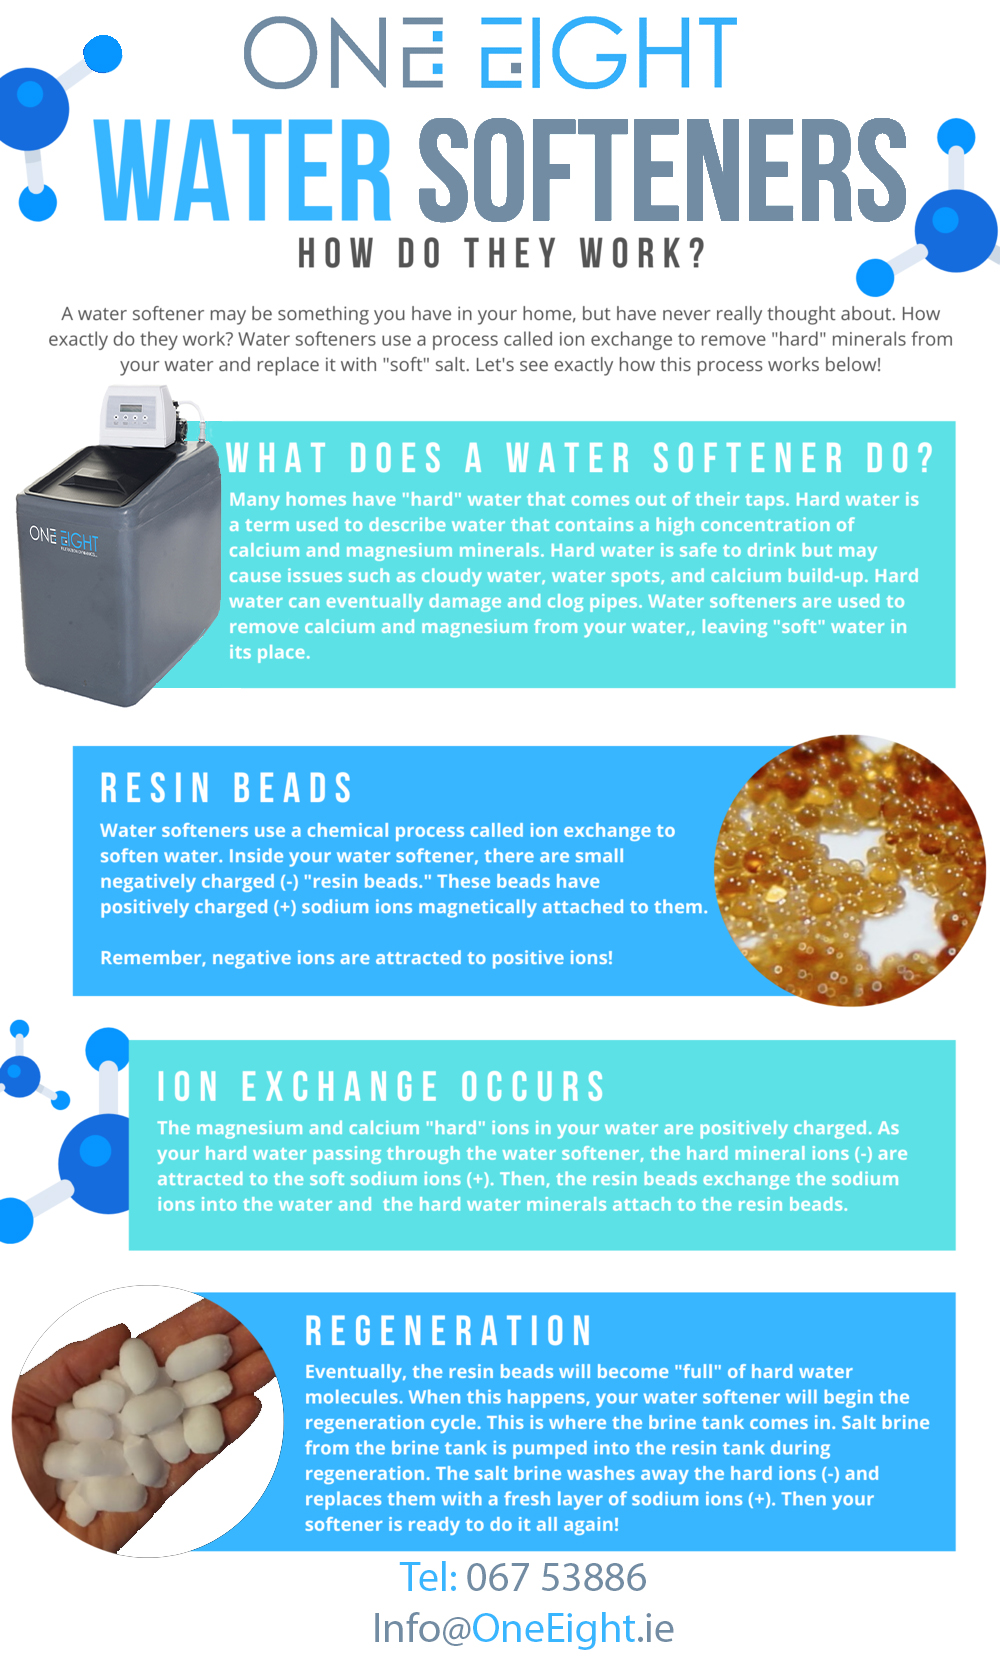 Here is what you need to know about how a water softener works.